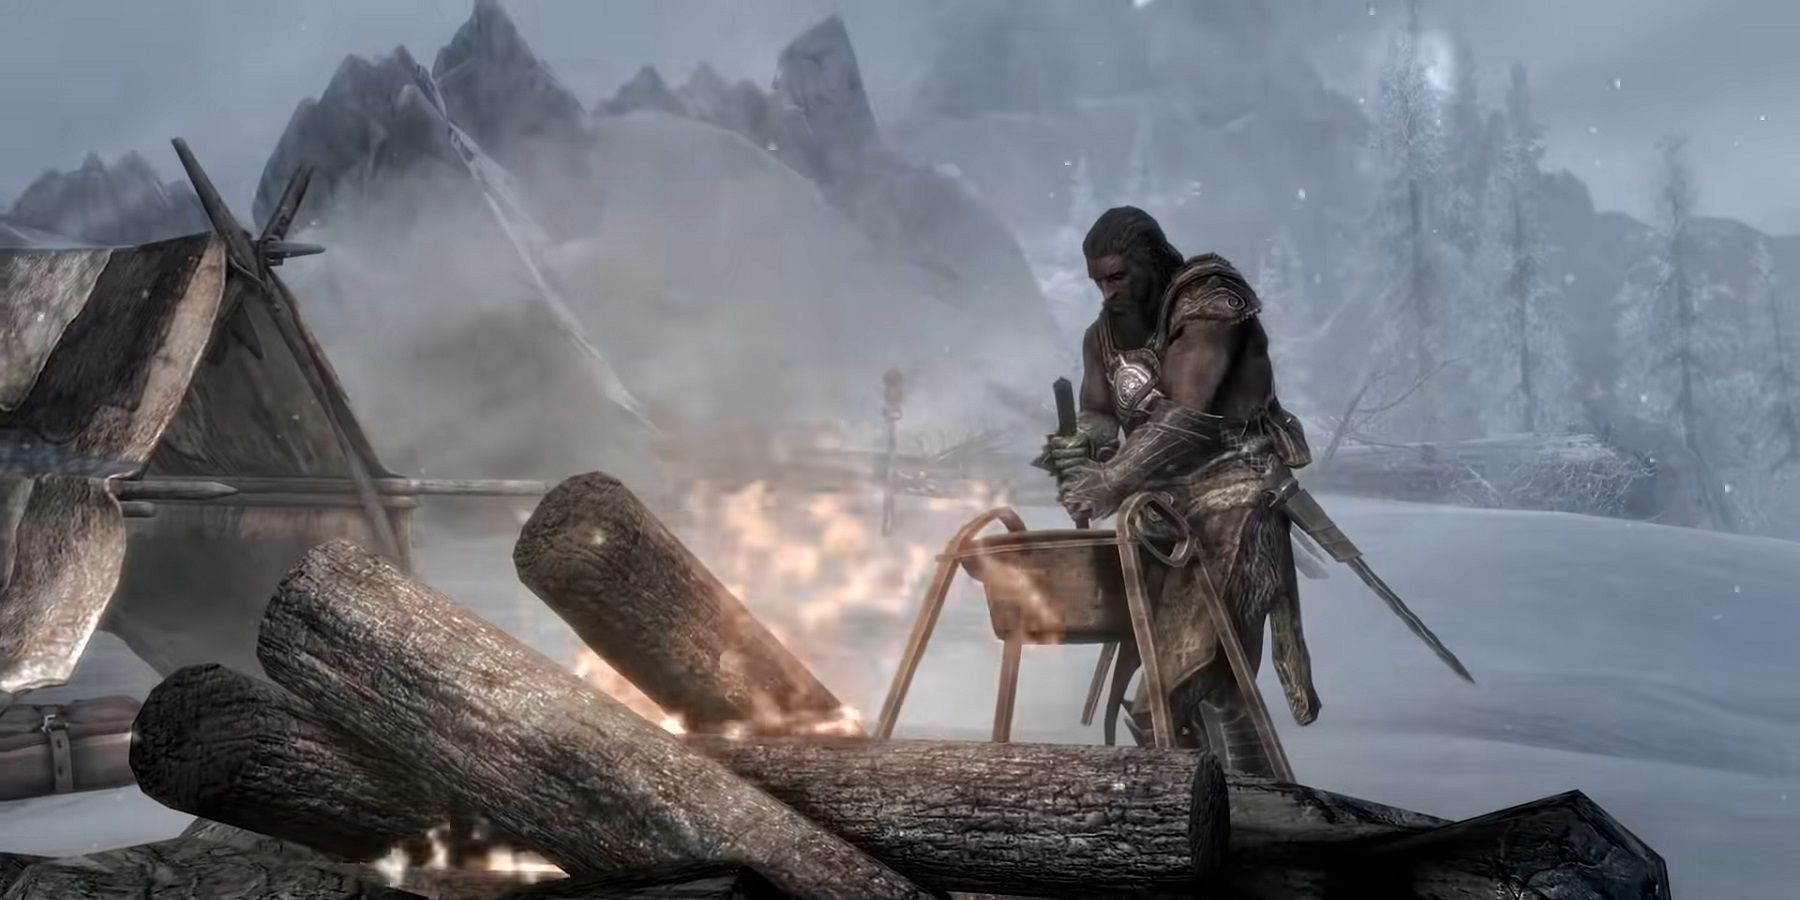 skyrim player dies after having soup in survival mode